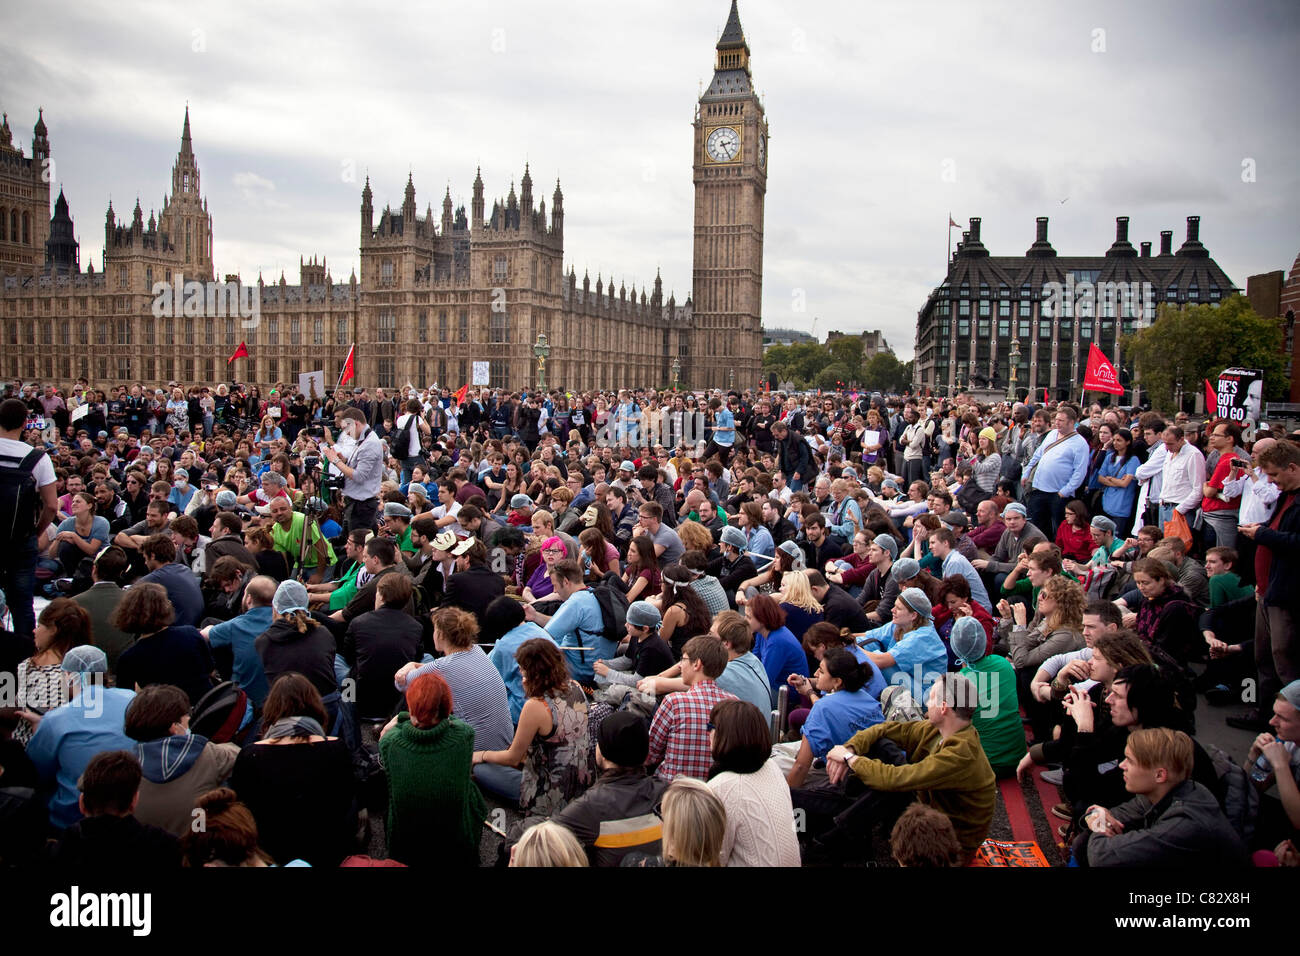 UK Uncut shut down Westminster Bridge, London in a protest / demonstration to block the NHS bill. Stock Photo